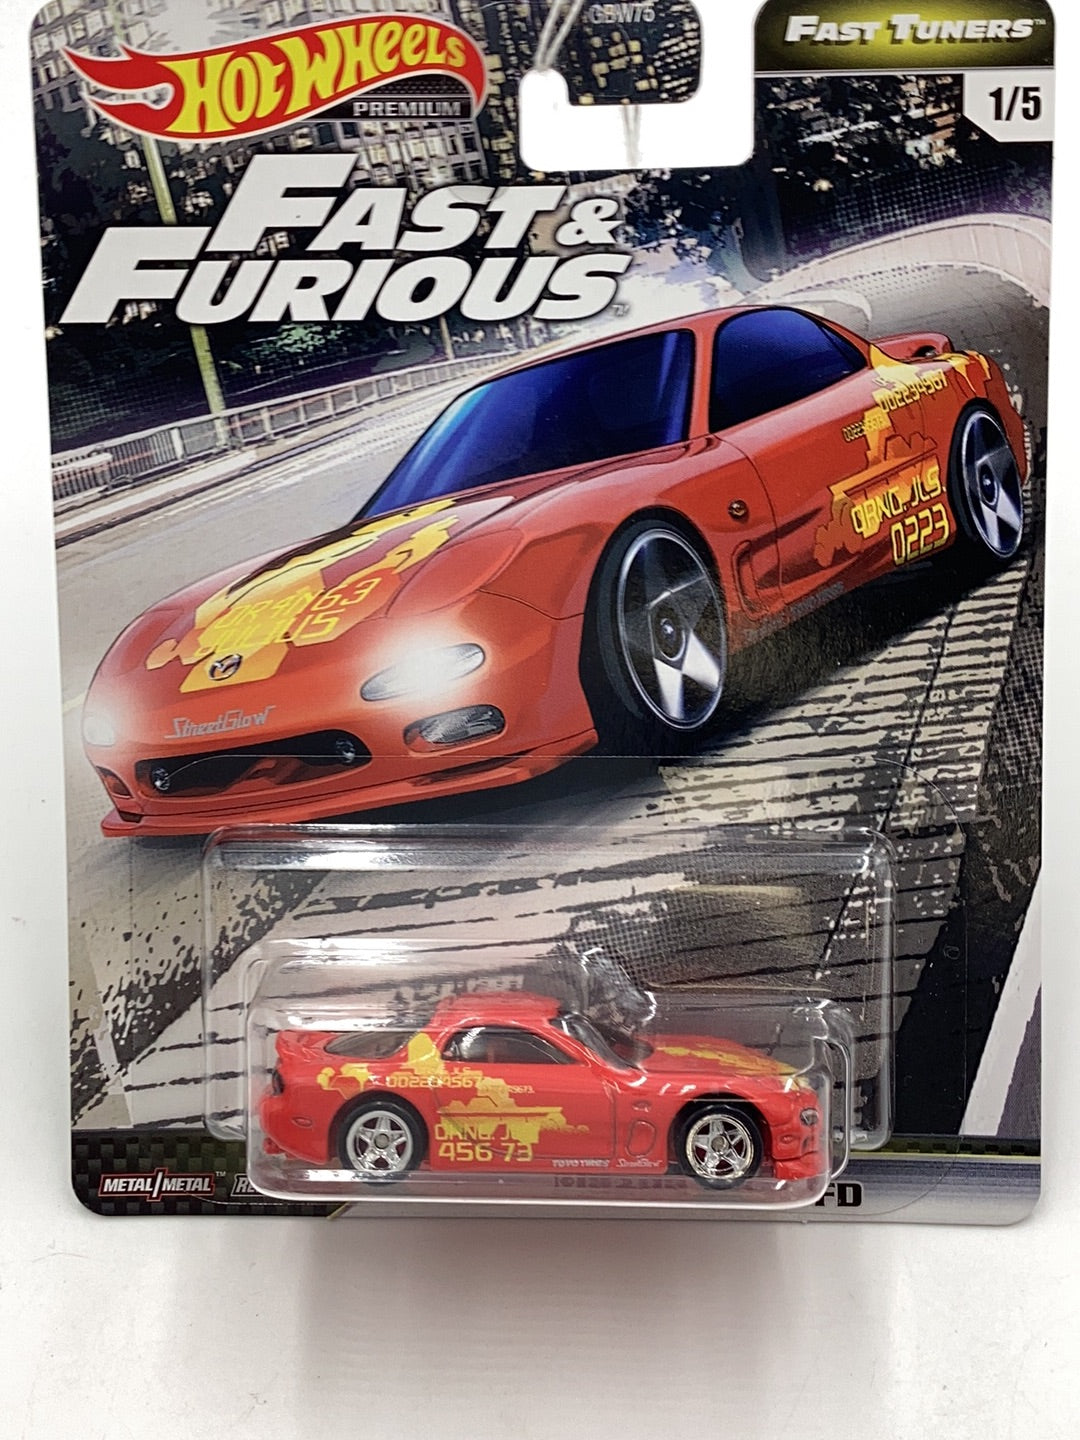 Hot Wheels premium fast and furious Fast Tuners #1 Mazda RX-7 FD 246J